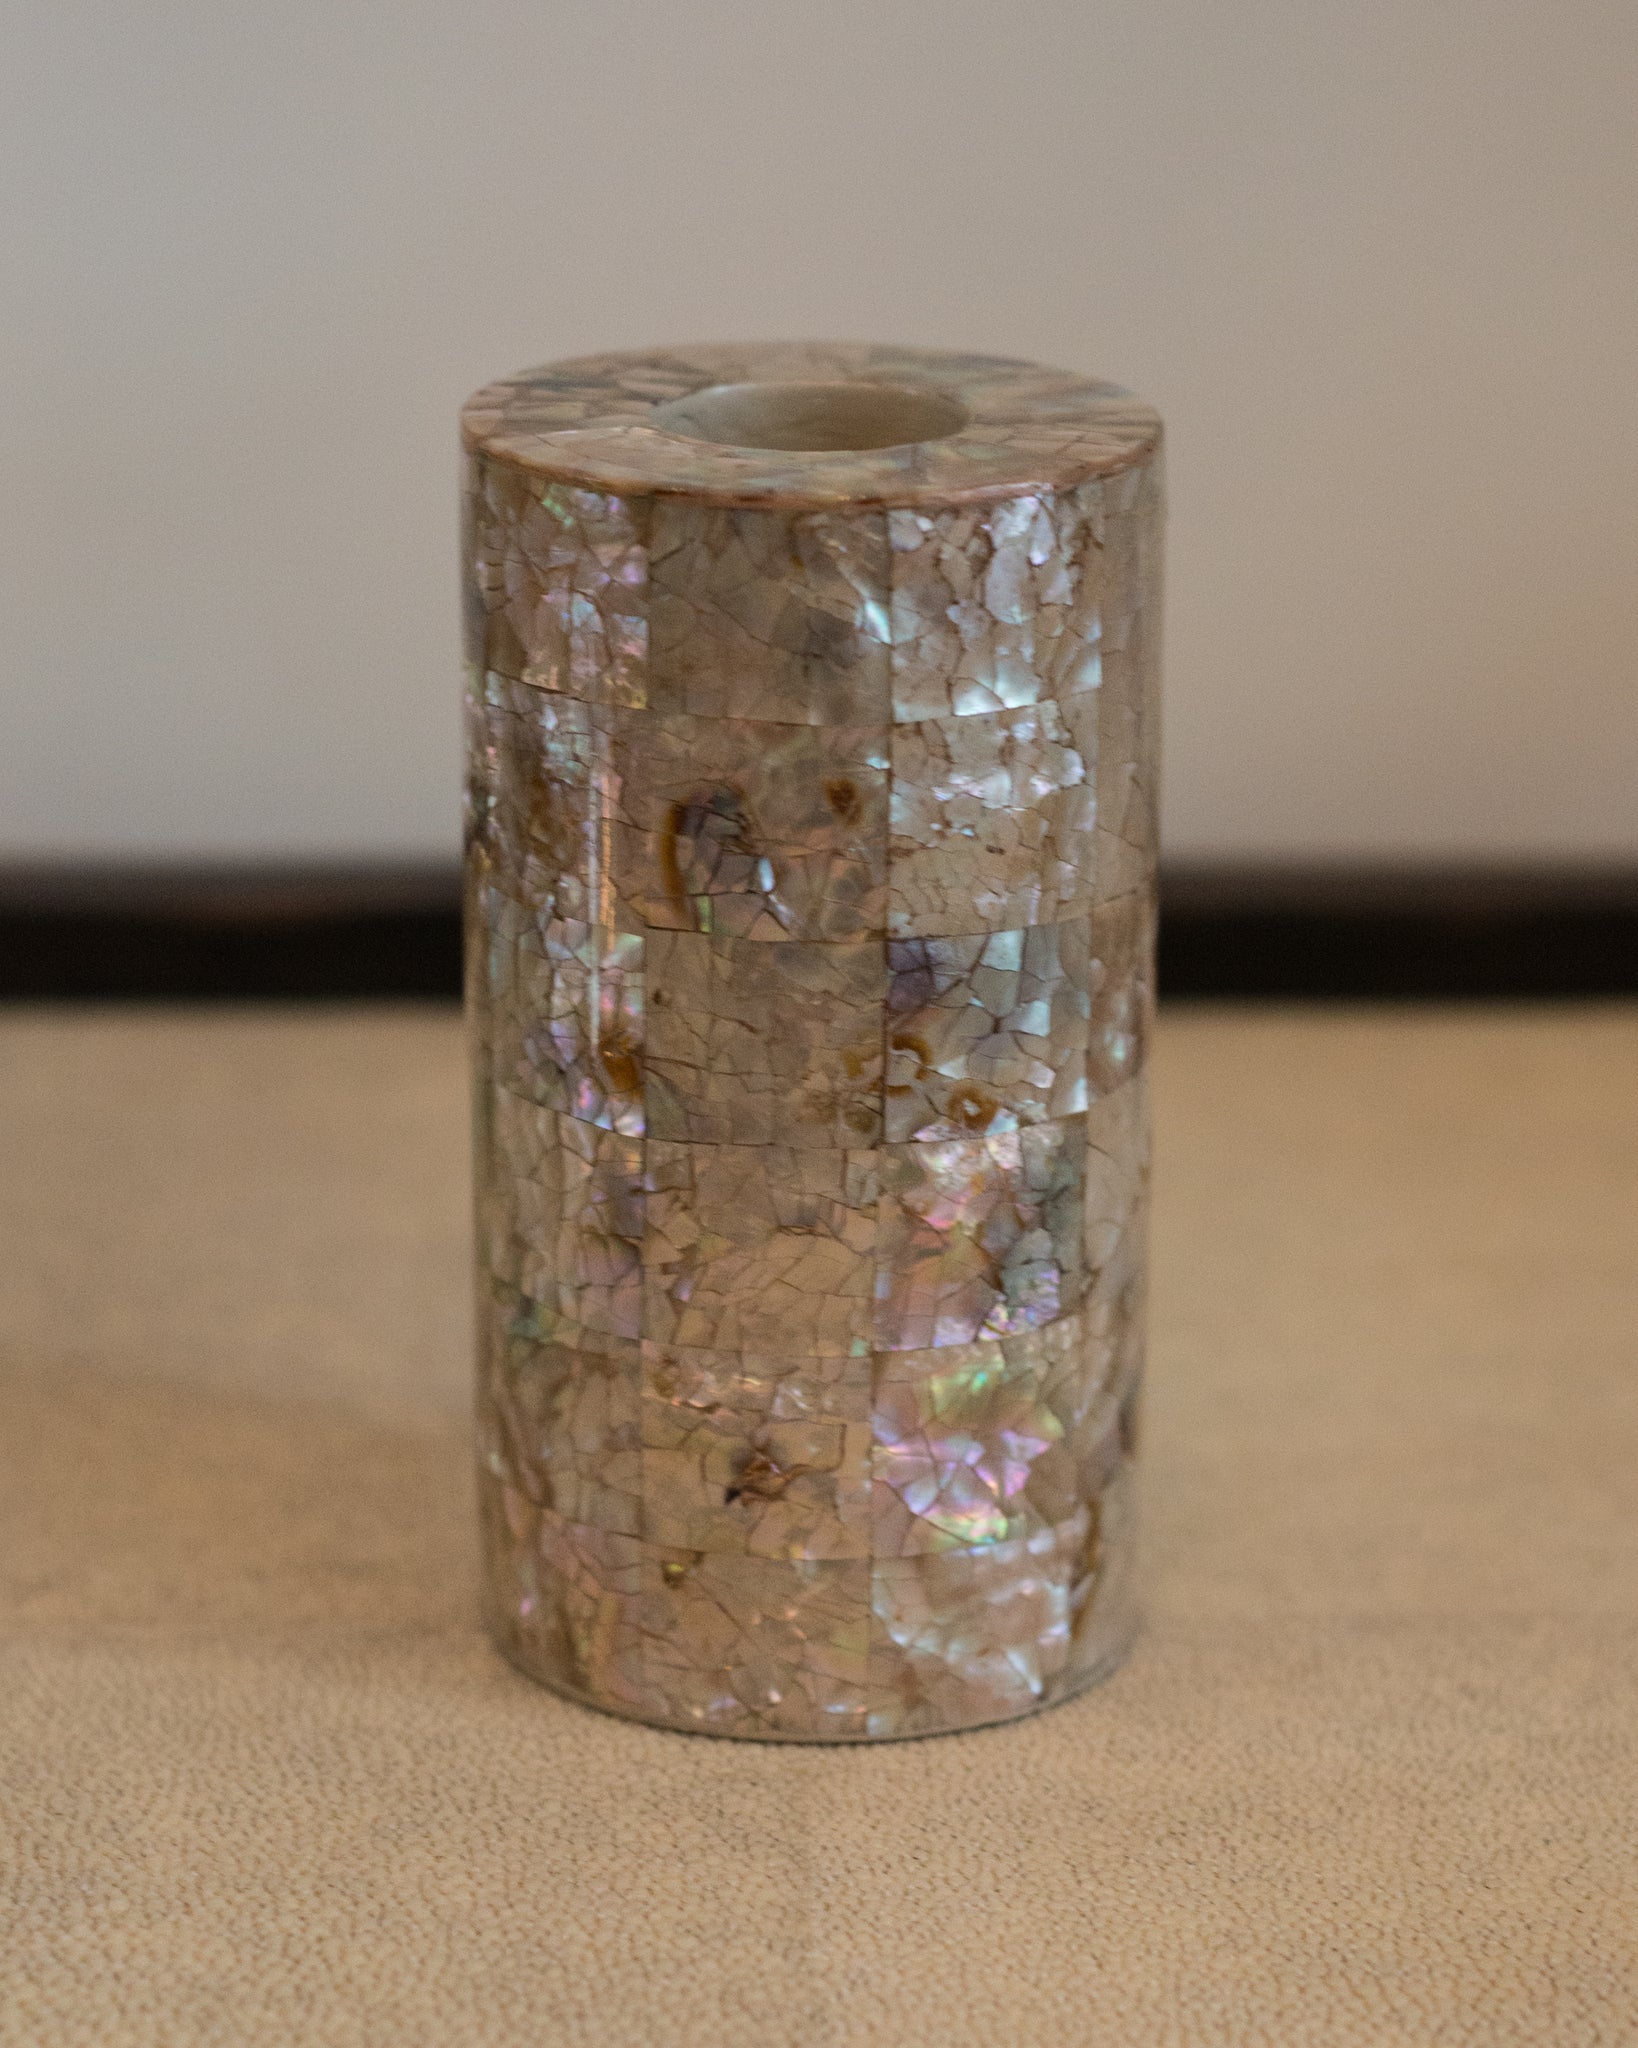 INLAID MOTHER OF PEARL ROUND SOAP DISPENSER HOLDER